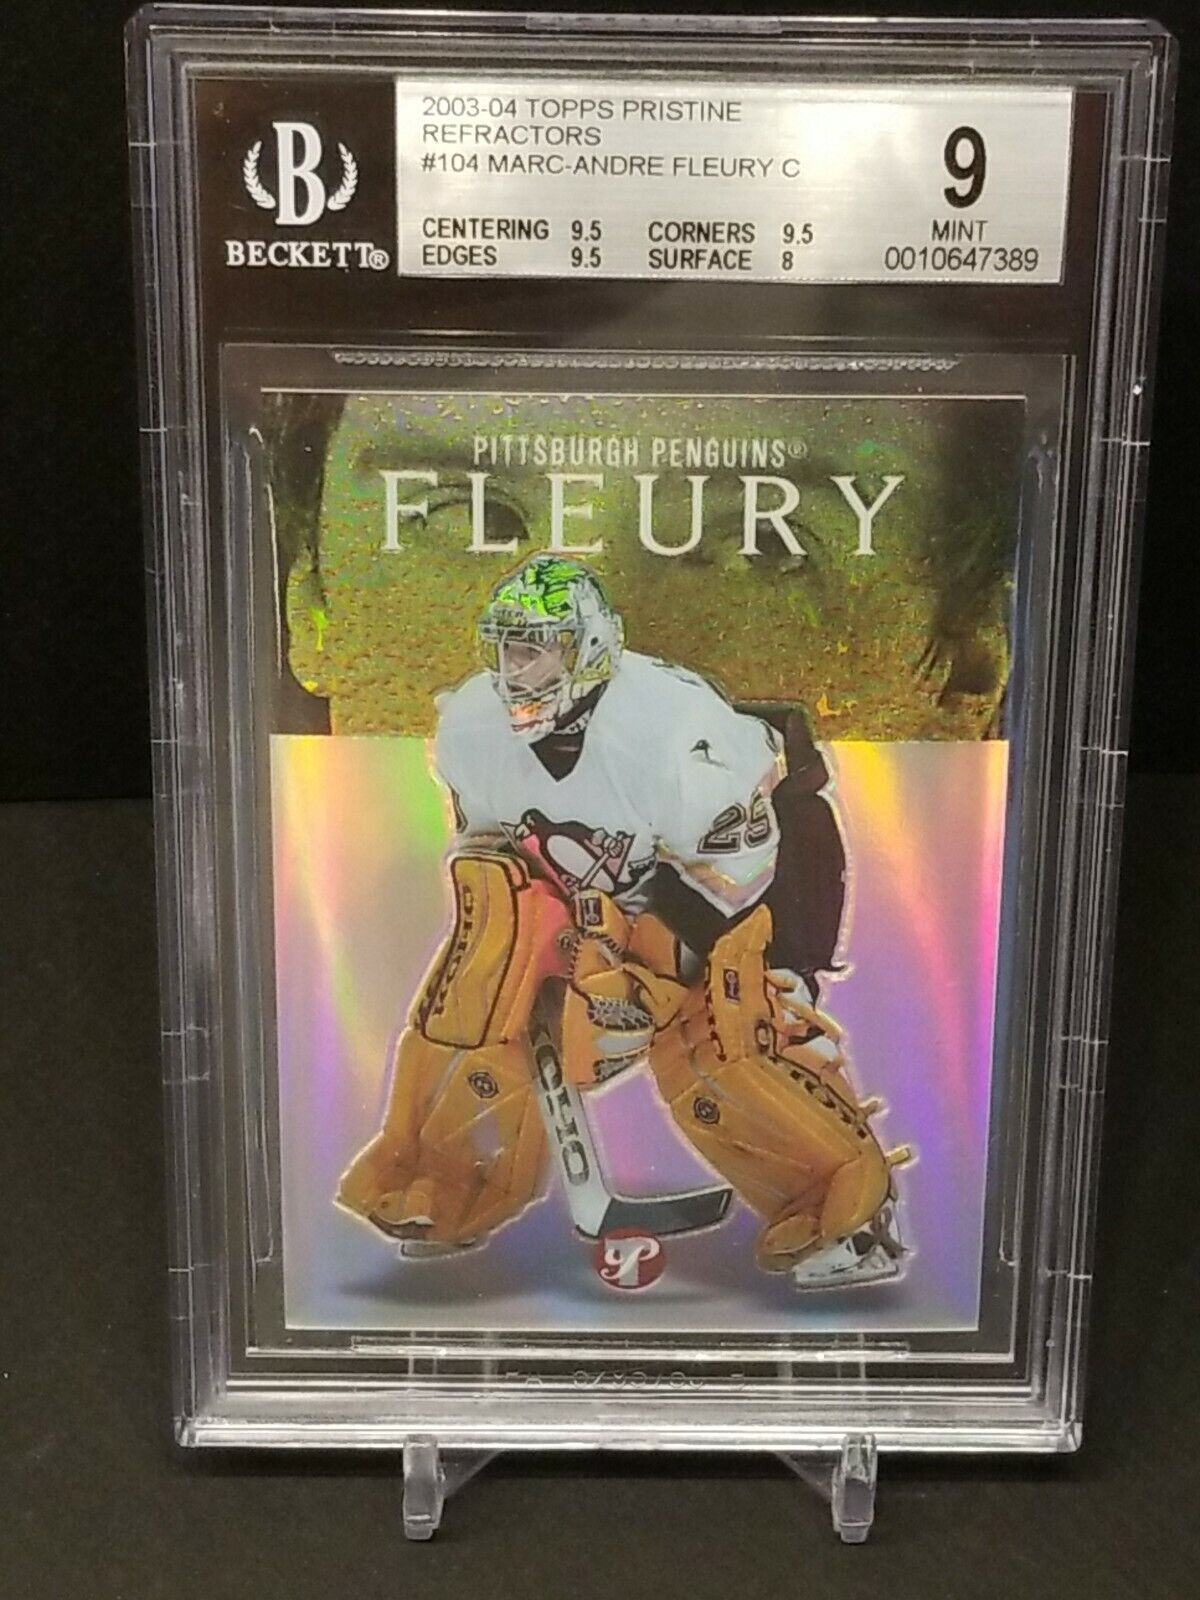 2003-04 Topps Pristine Refractor #104 BGS 9 ROOKIE RC MARC-ANDRE FLEURY 351/499